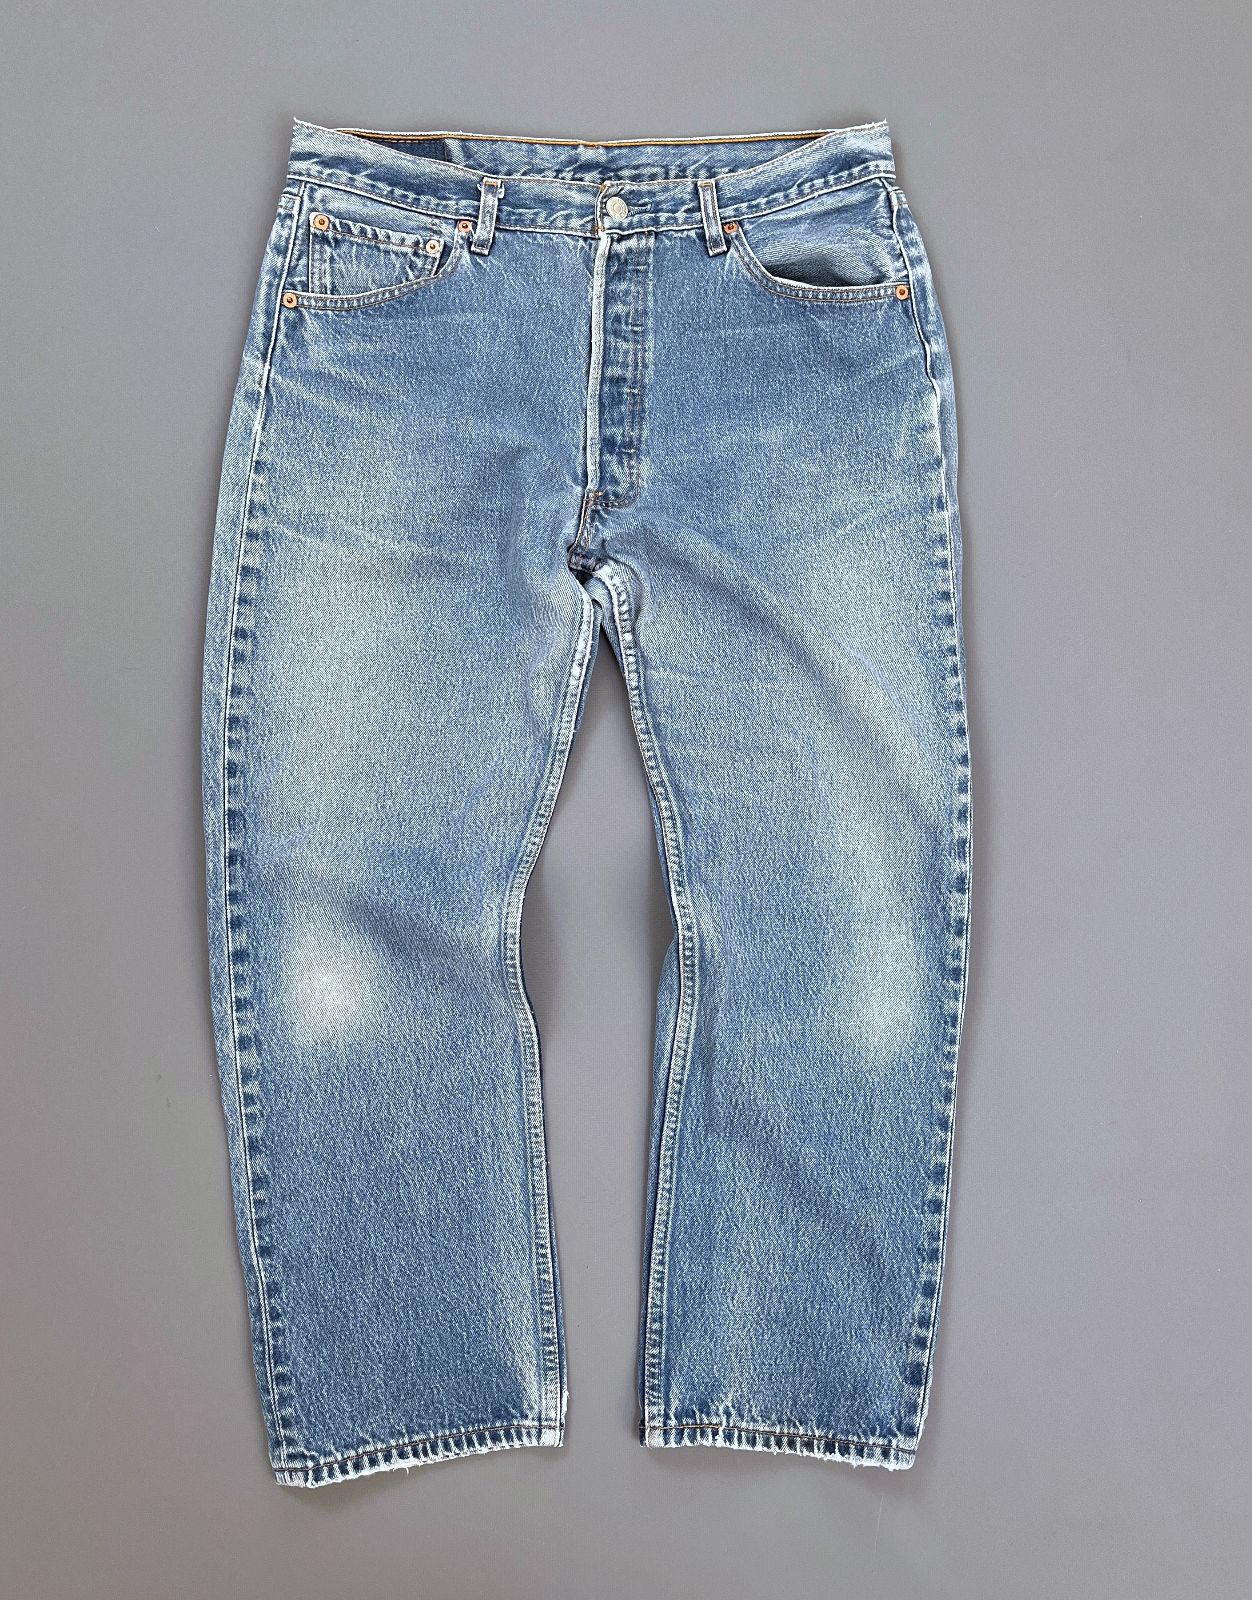 product details: LEVIS 501 LIGHTLY DISTRESSED CLASSIC WASH RED TAB BUTTON FLY DENIM JEANS photo